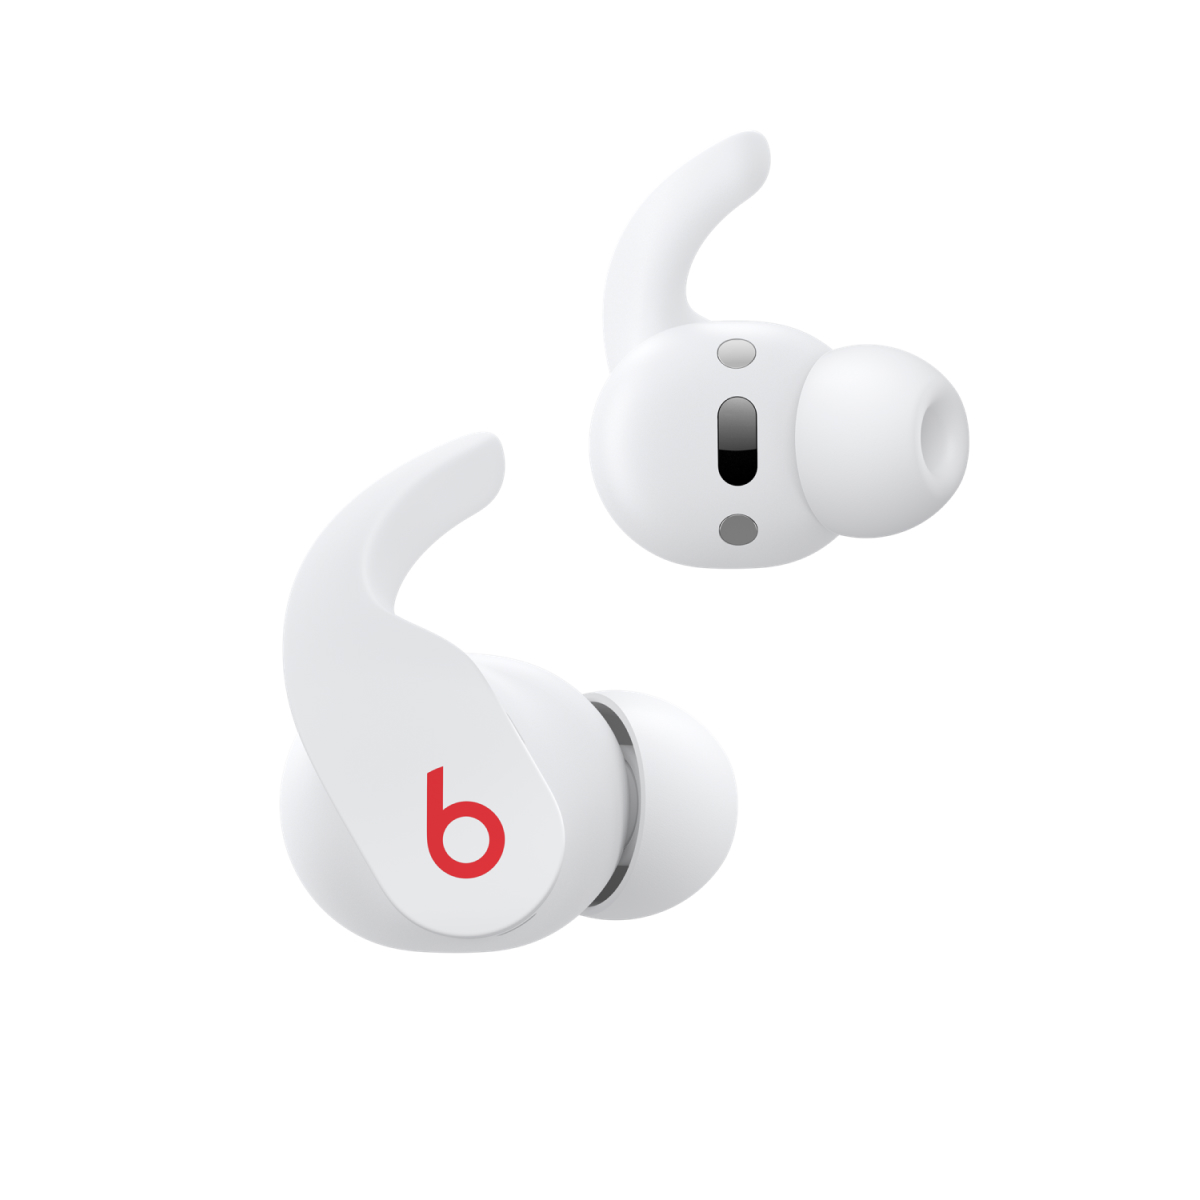 Beats by Dr. Dre Studio 3 Wireless Over-Ear Headphones with Built-in Mic -  White (Renewed) : Electronics 